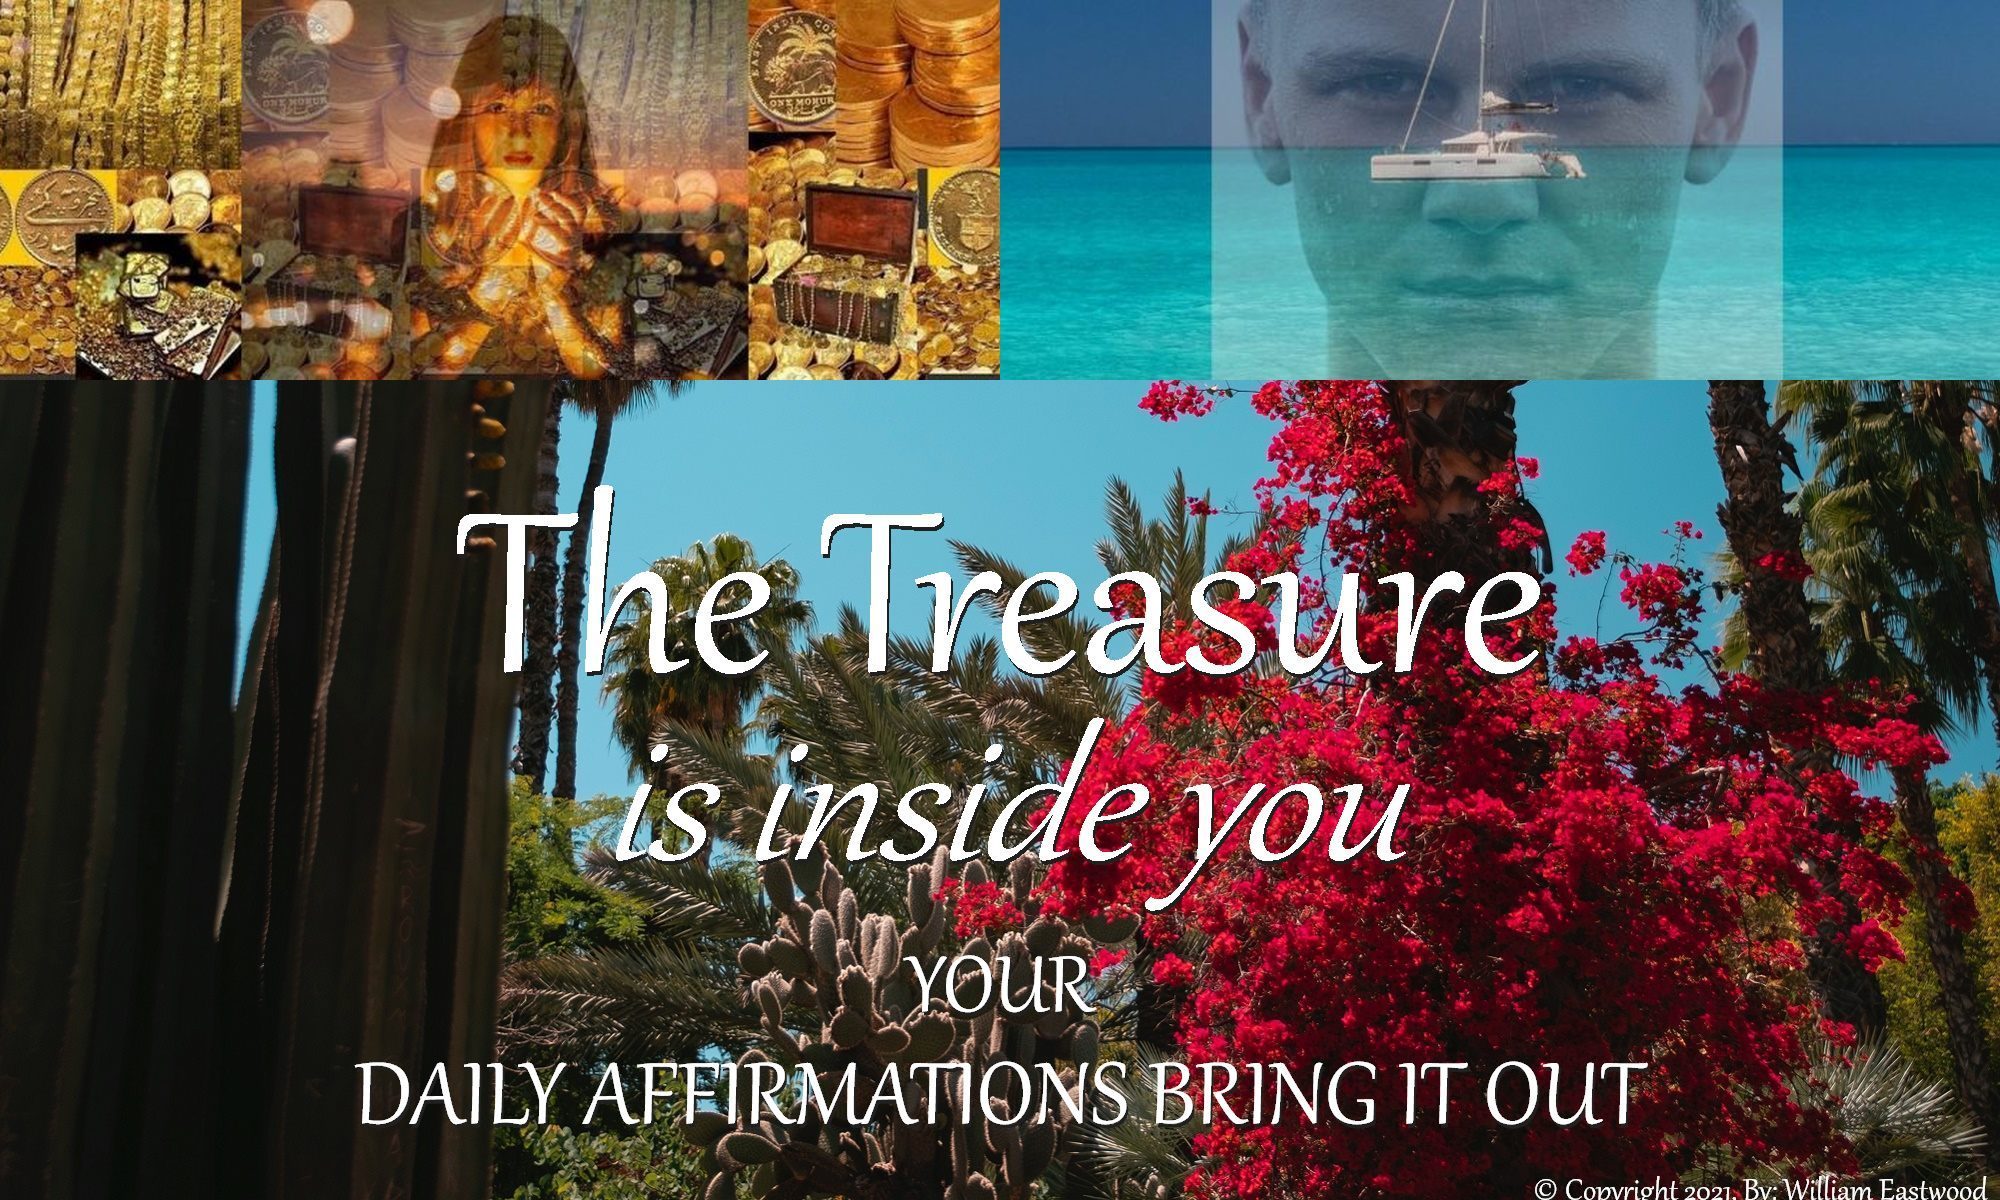 Find-Get-Your-Daily-Affirmations-Metaphysical-Guidance-page-sites-